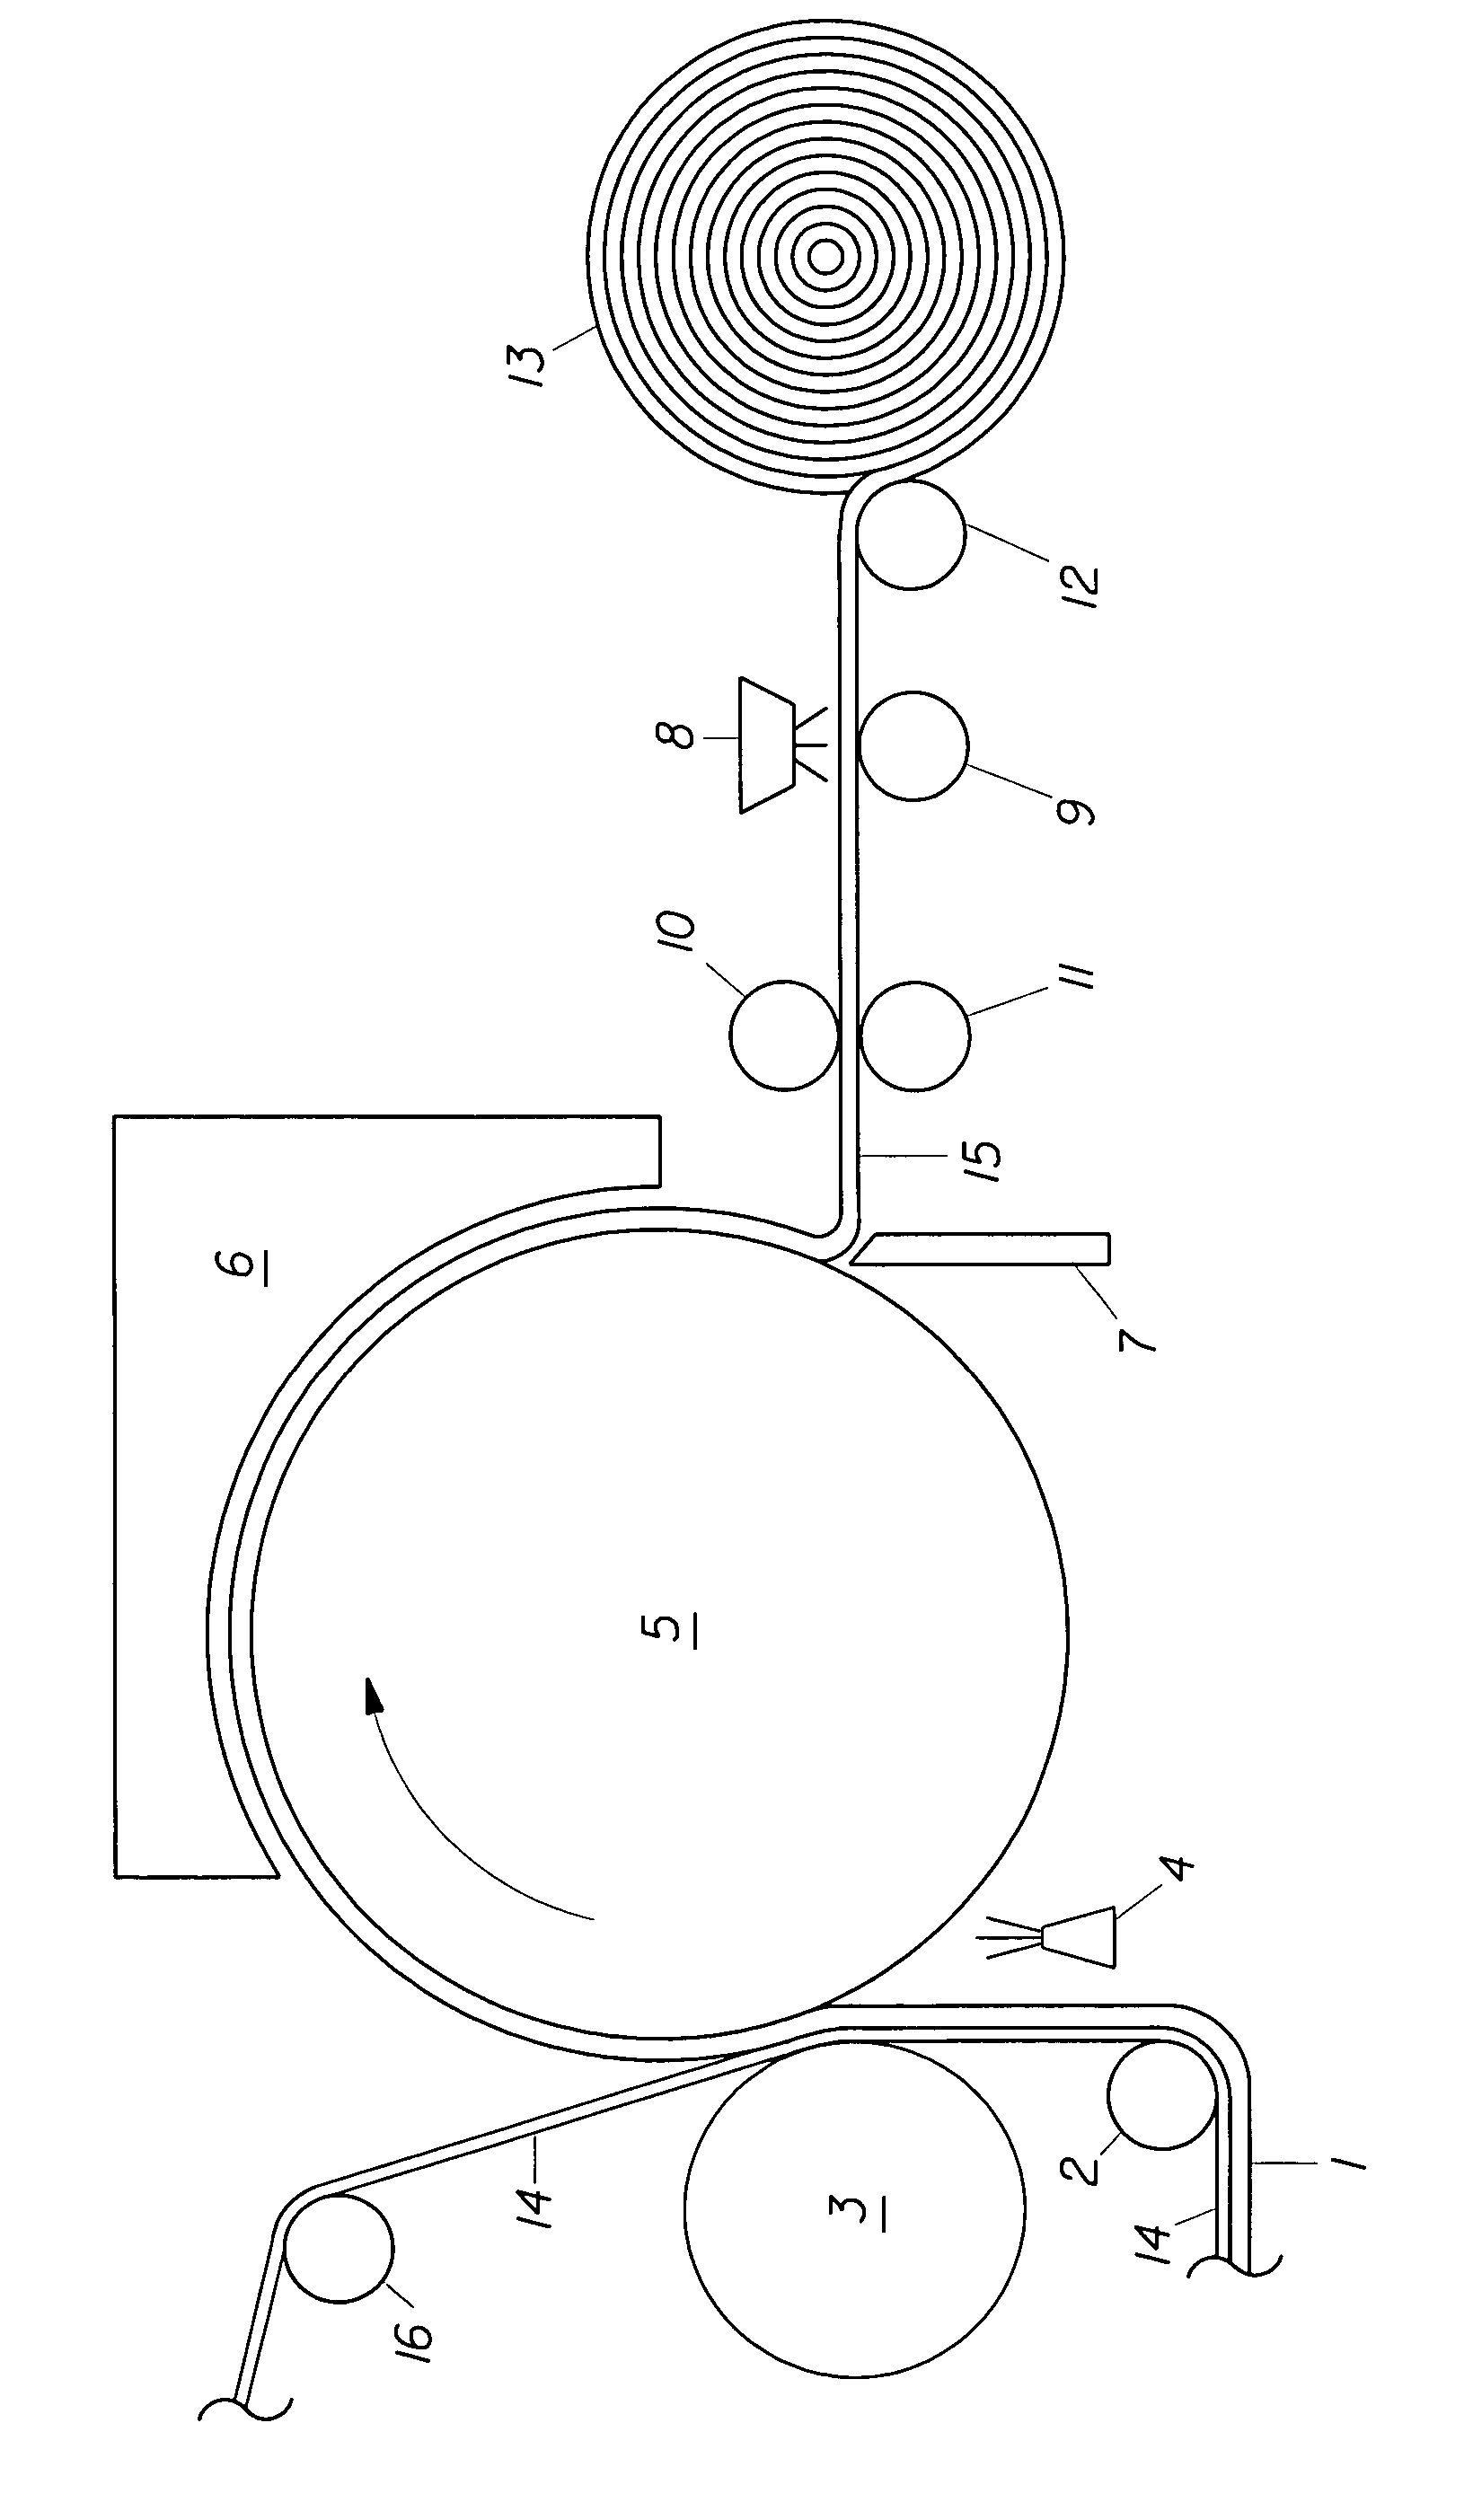 Paper softening compositions containing low levels of high molecular weight polymers and soft tissue paper products comprising said compositions